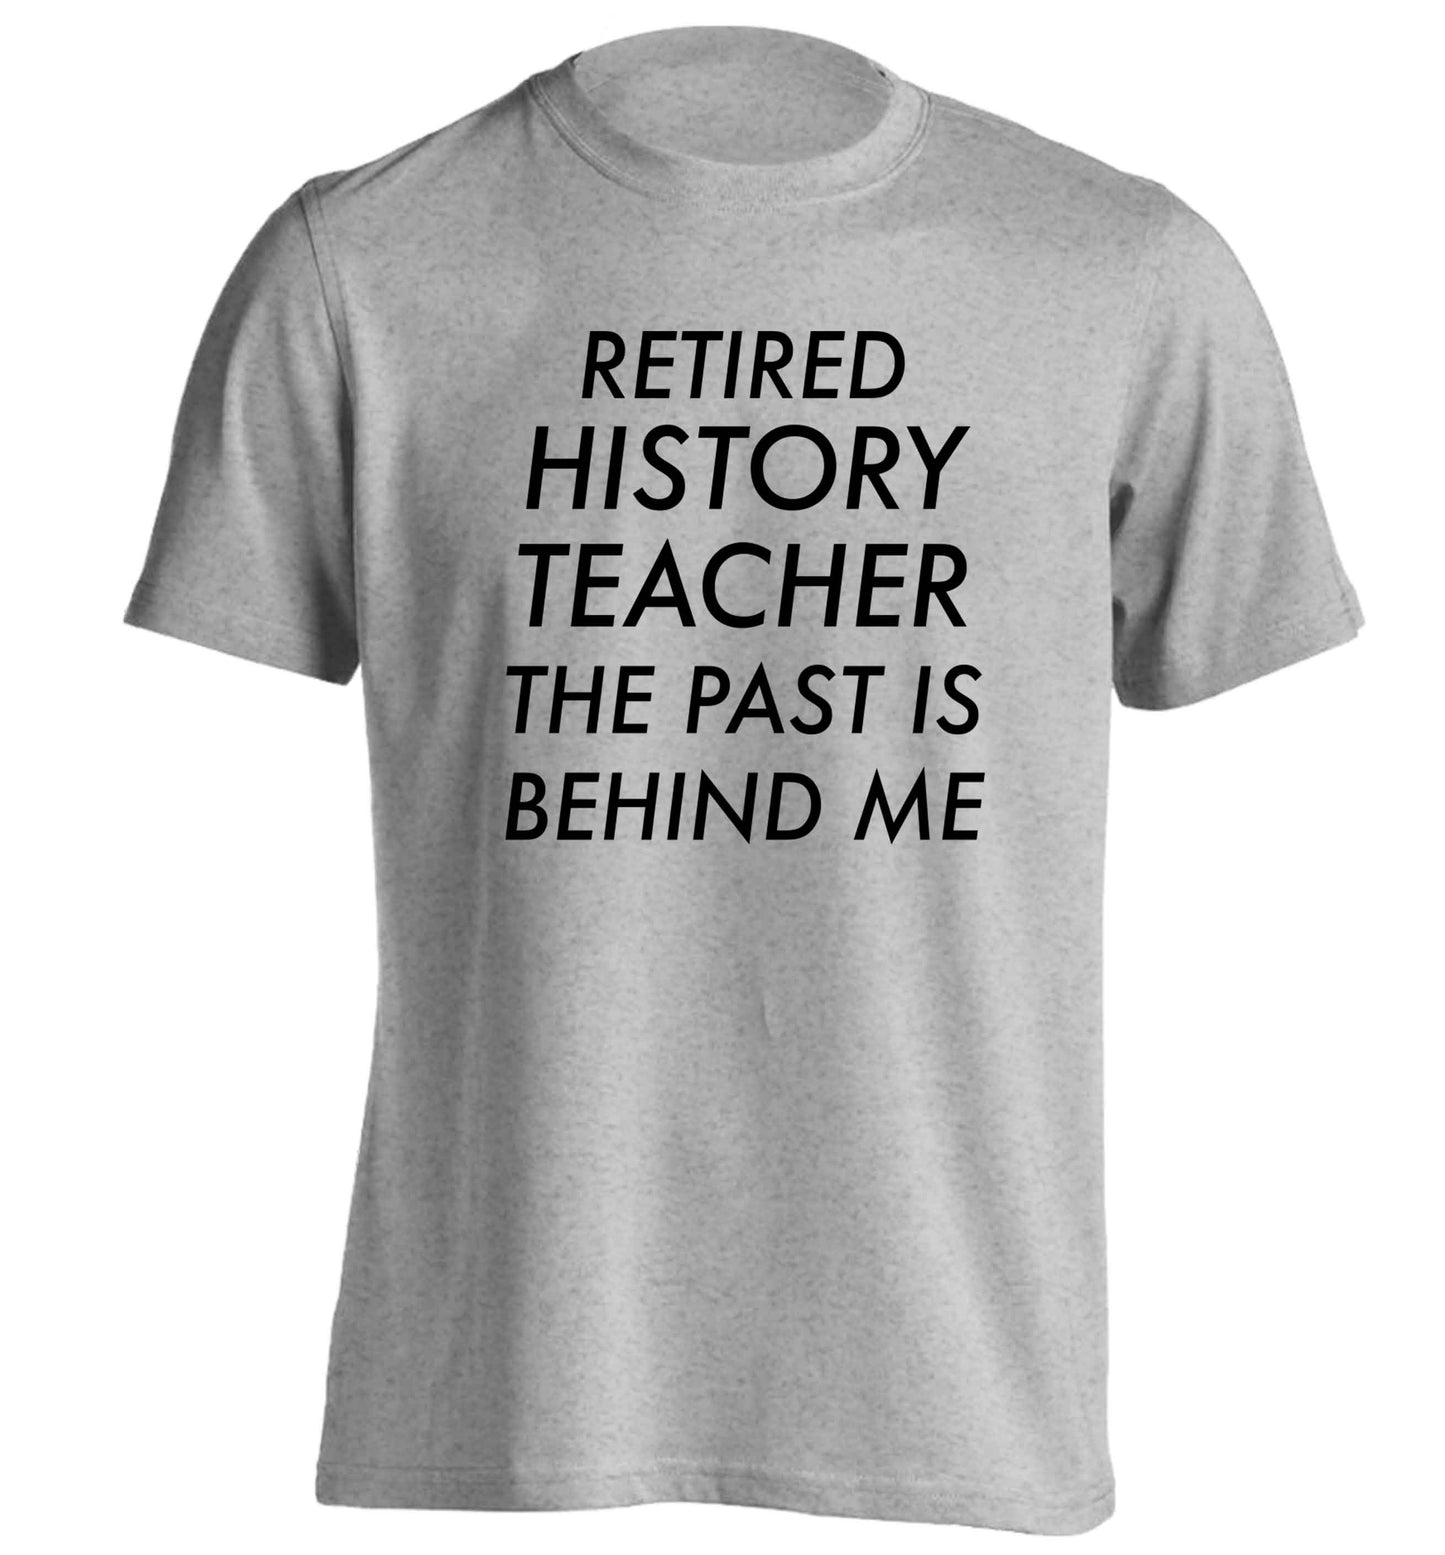 Retired history teacher the past is behind me adults unisex grey Tshirt 2XL